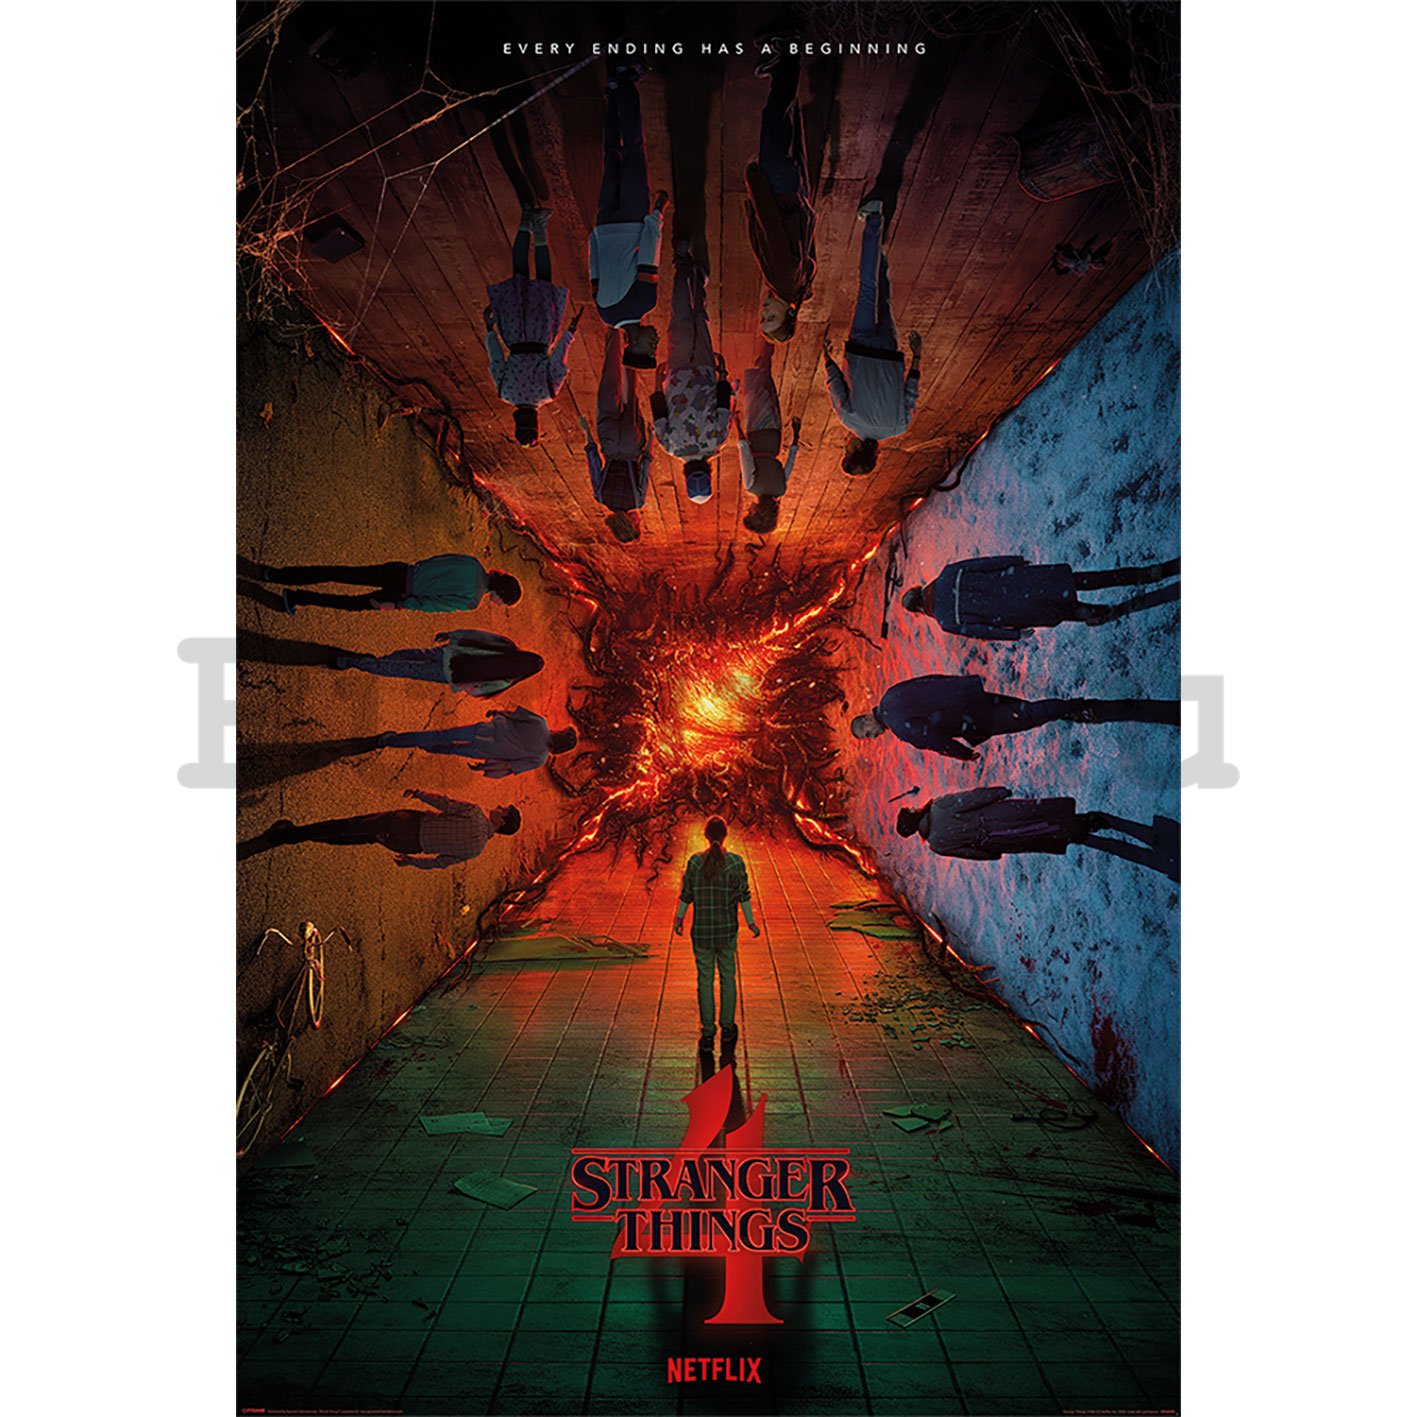 Poster - Stranger Things 4 (Every Ending Has a Beginning)